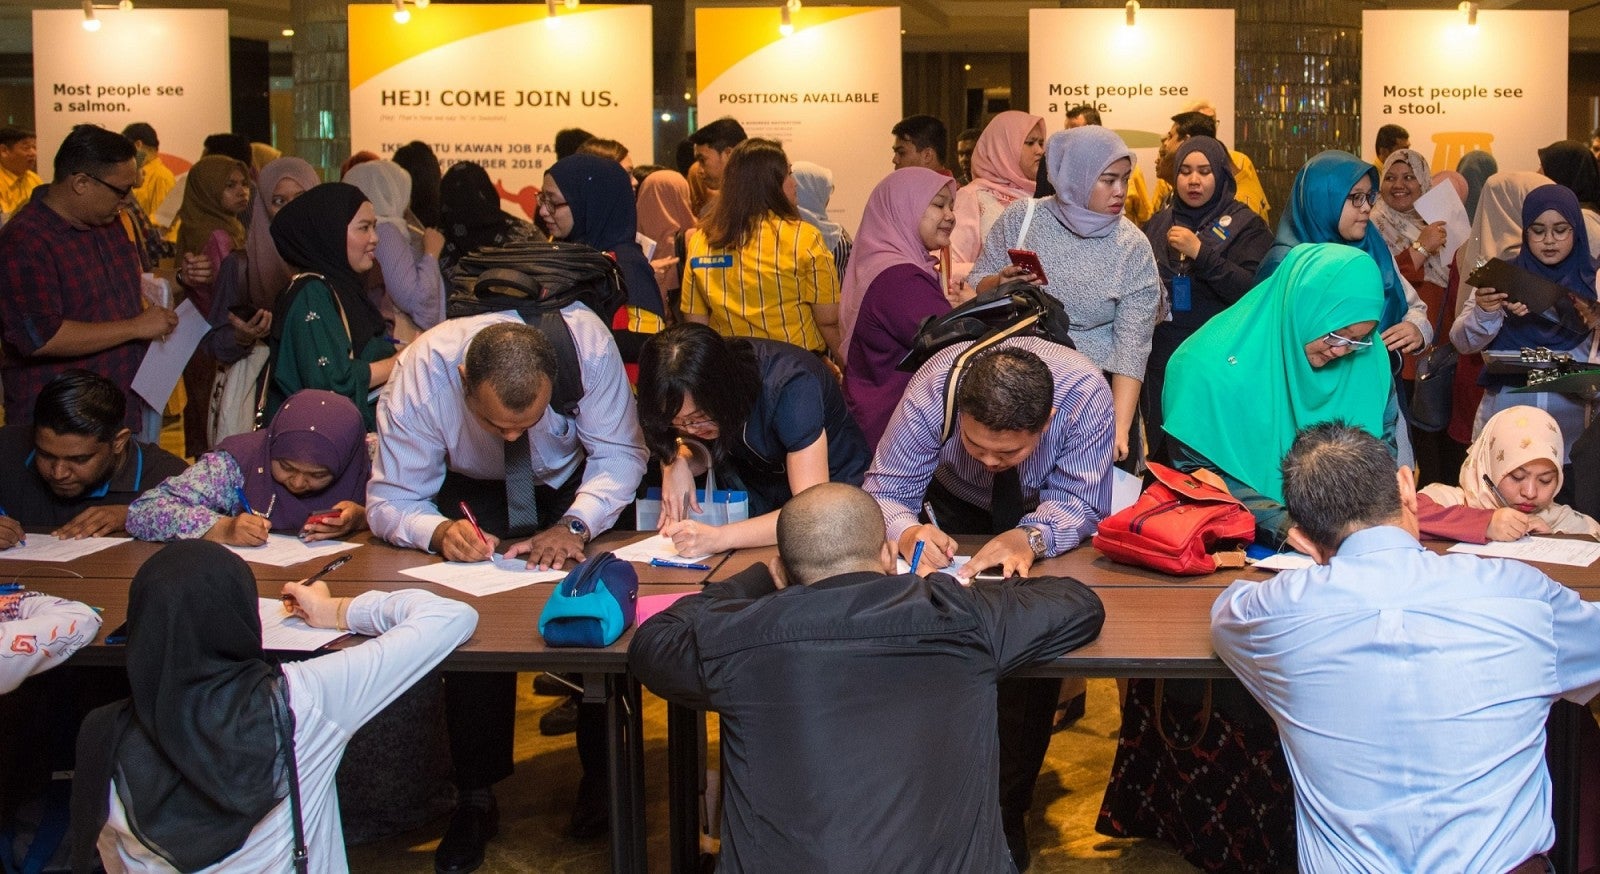 IKEA is Opening in Penang, And Over 3,000 People Showed Up For Recruitment! - WORLD OF BUZZ 1